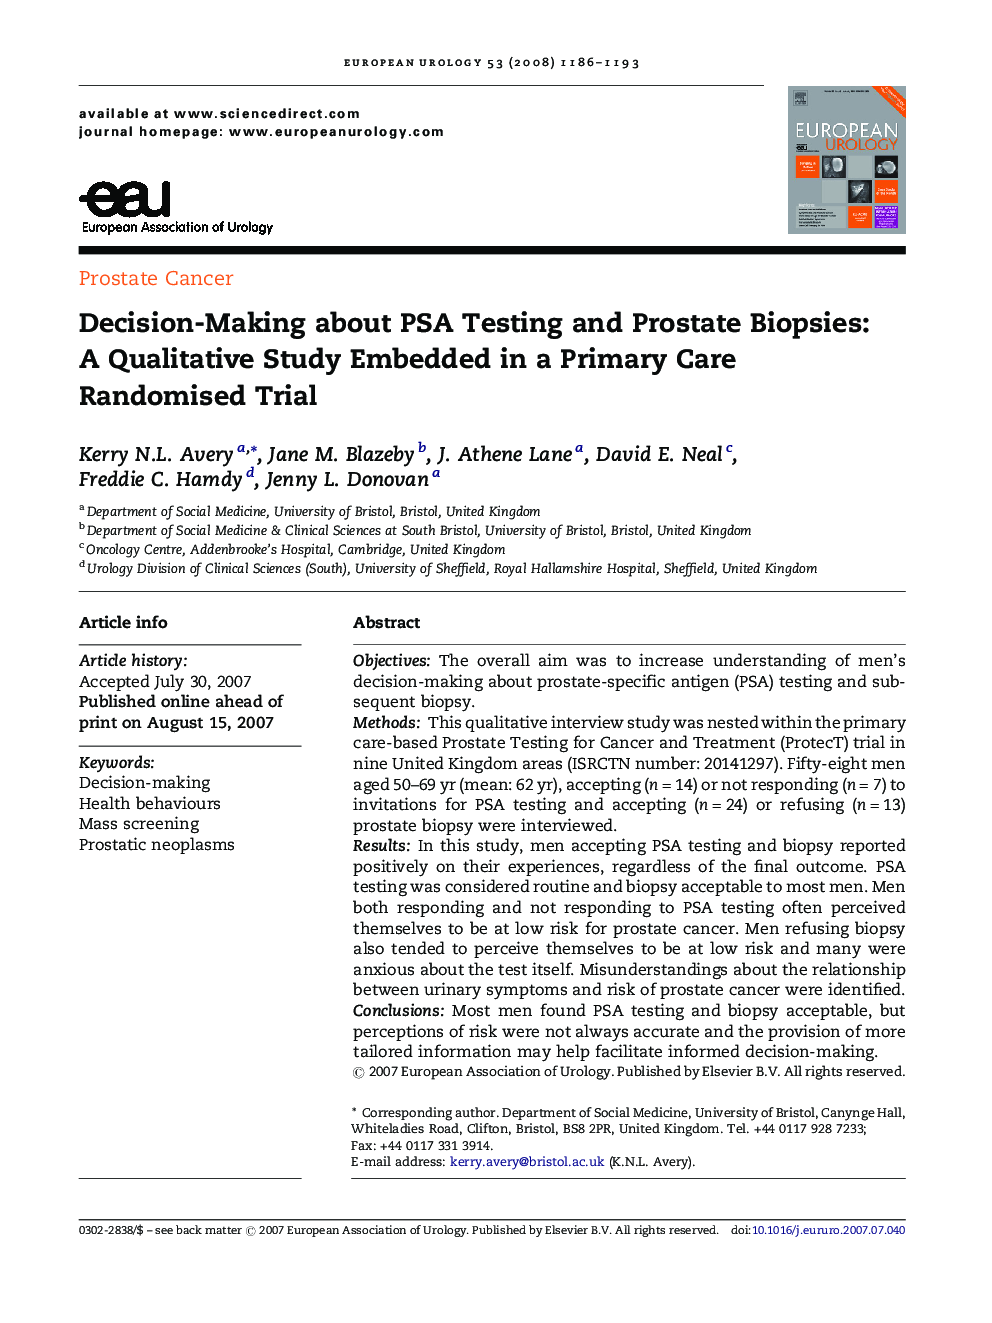 Decision-Making about PSA Testing and Prostate Biopsies: A Qualitative Study Embedded in a Primary Care Randomised Trial